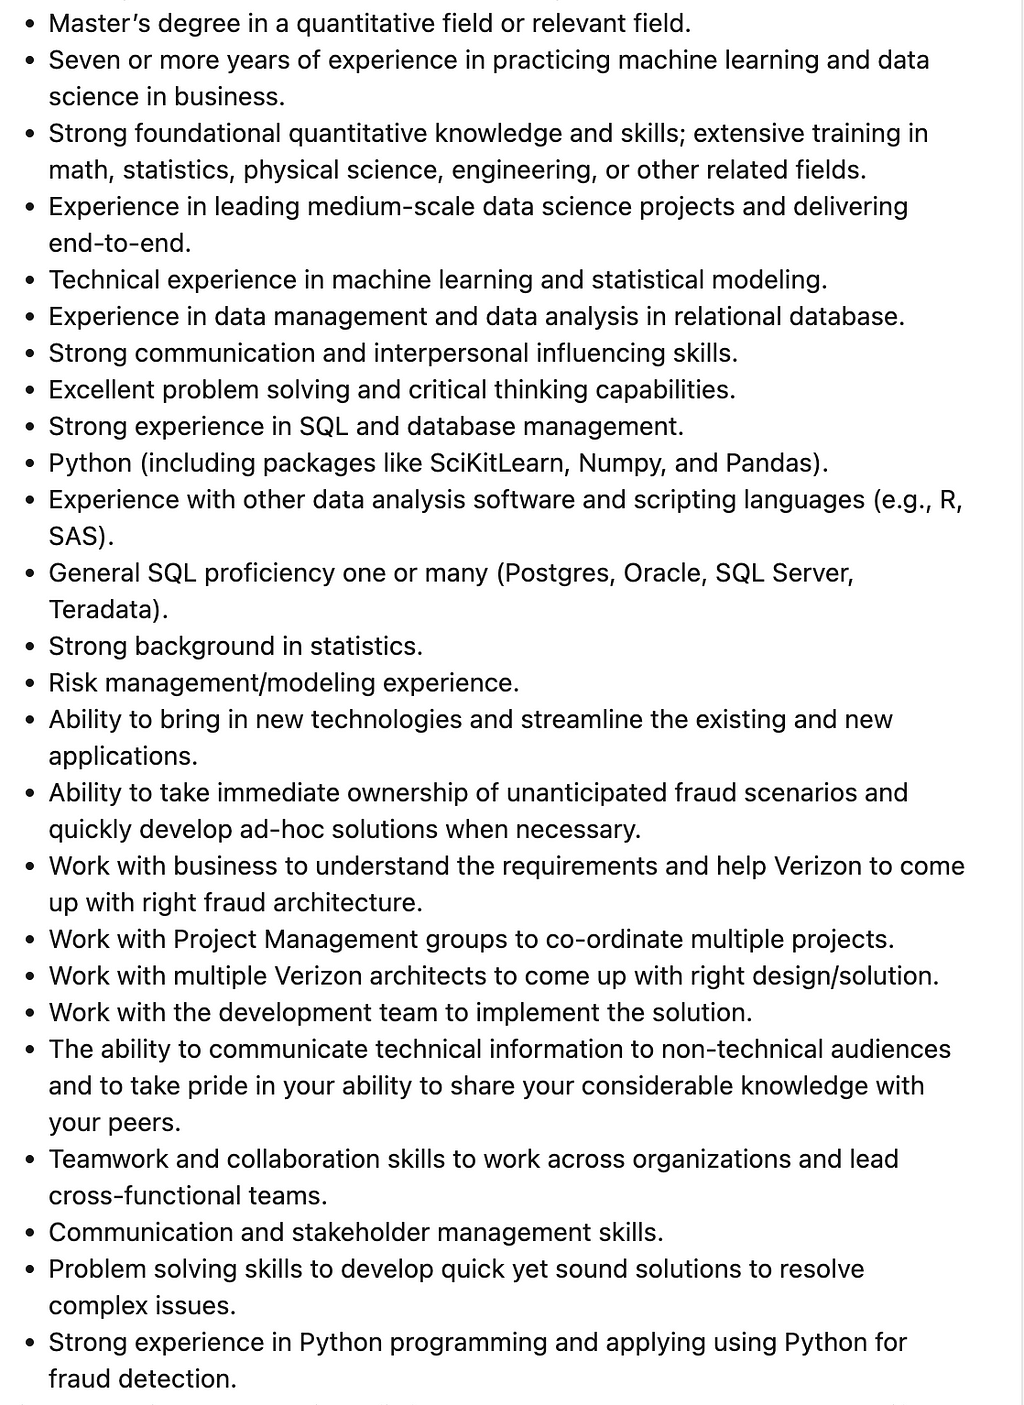 Job Requirement Example from Linkedin